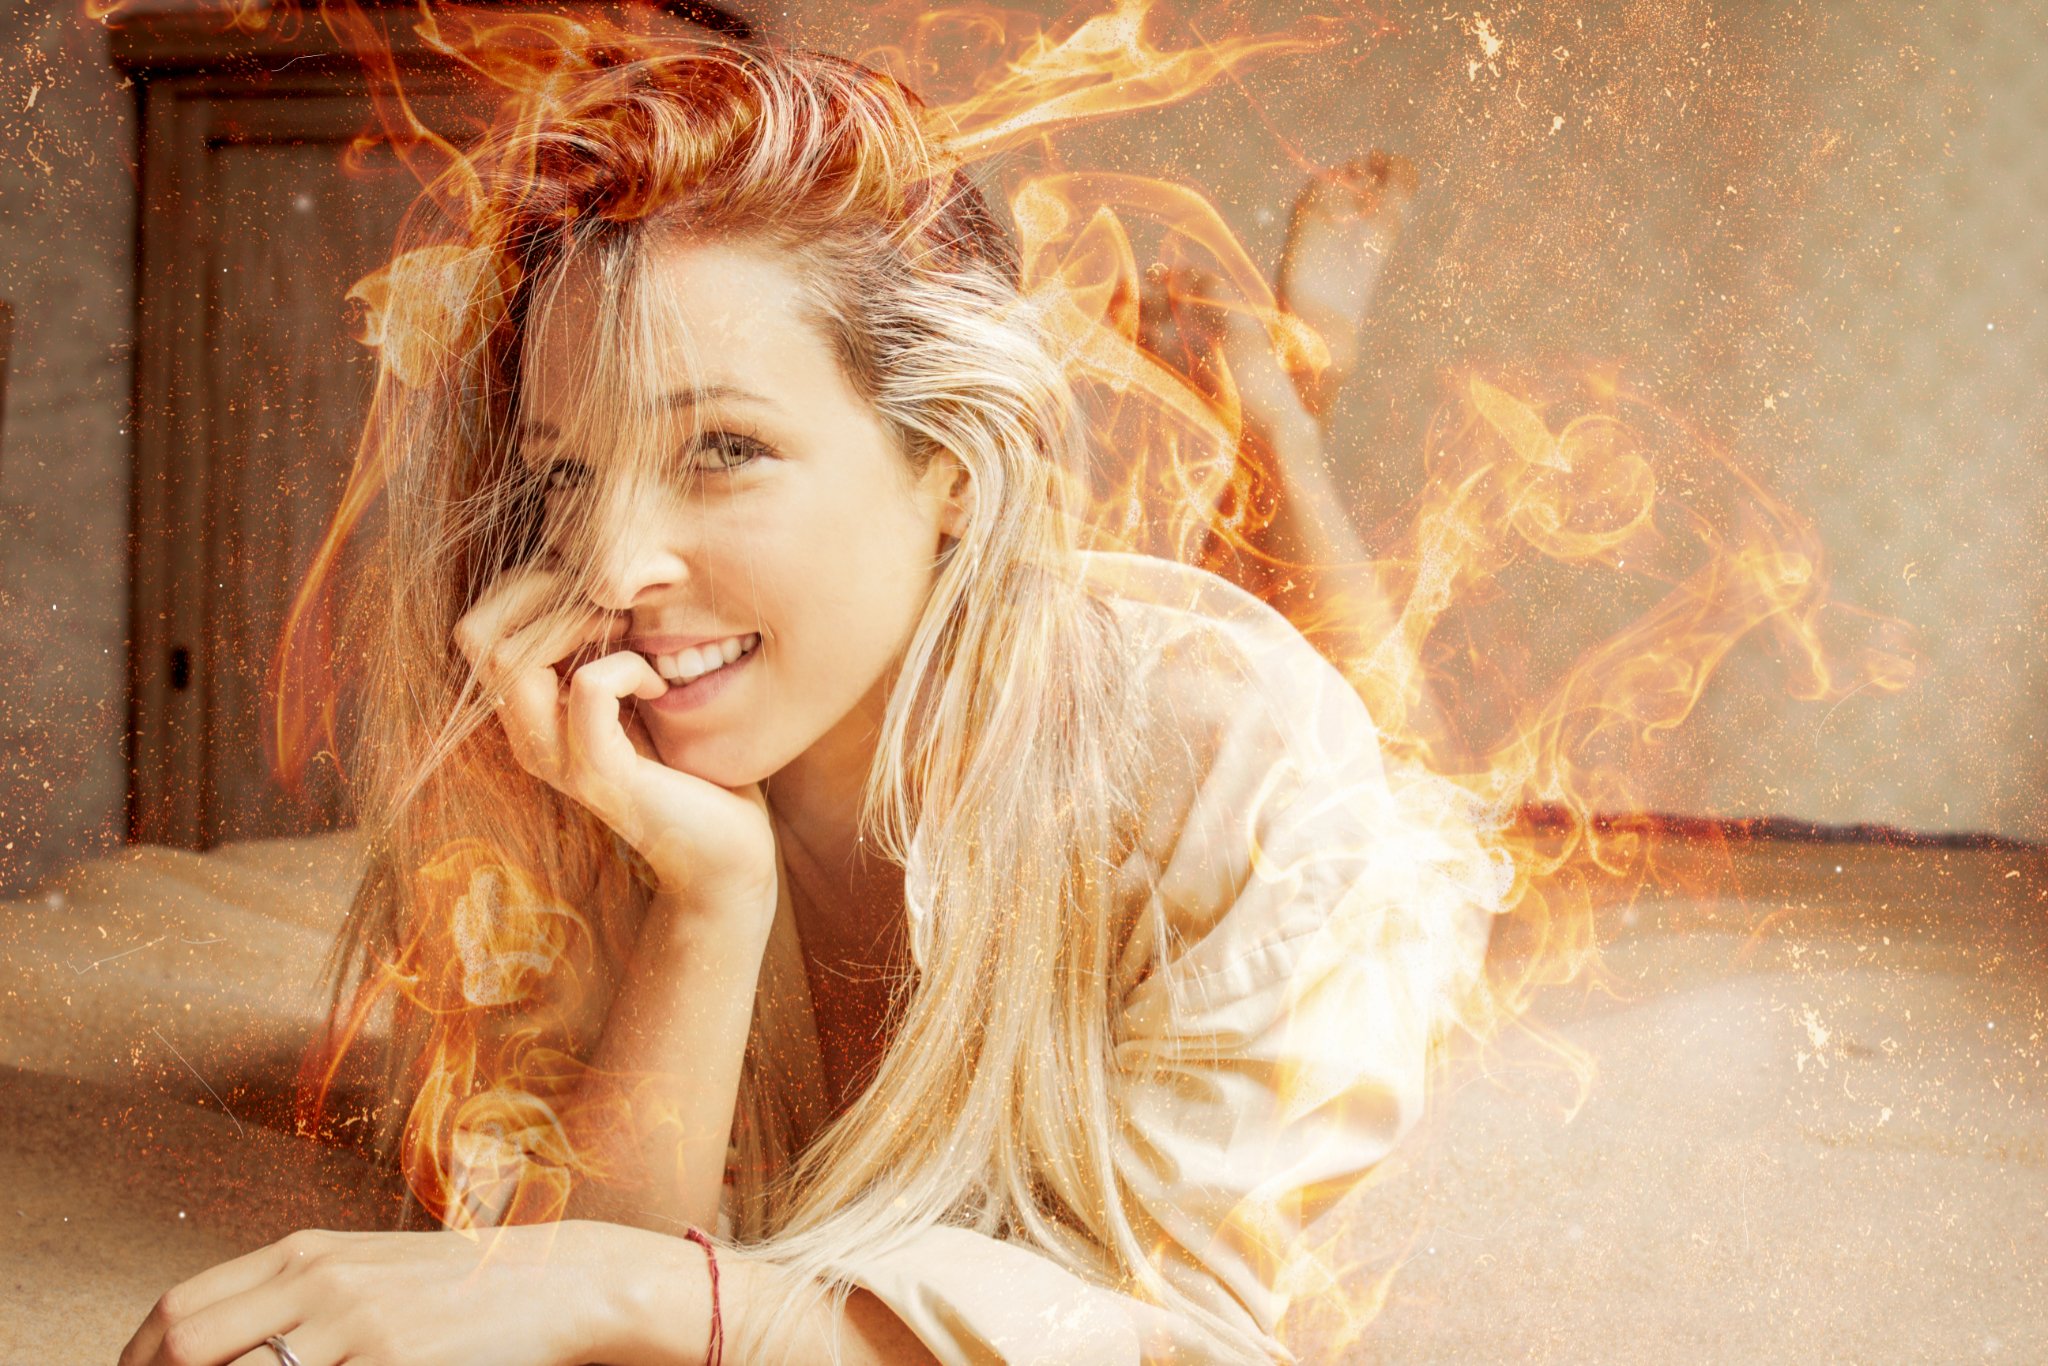 affinity fireeffect on images 401